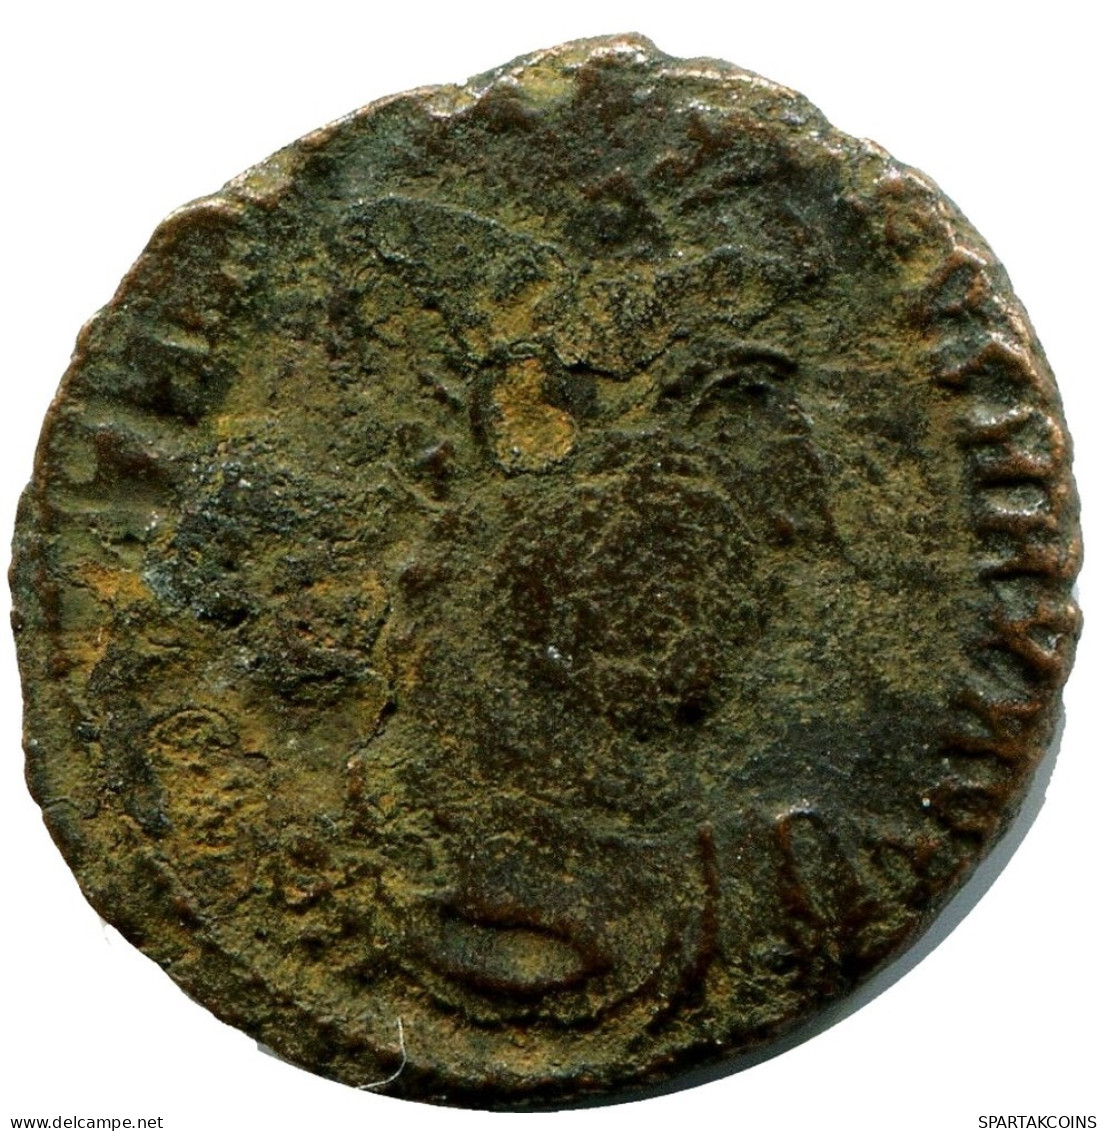 CONSTANTINE I MINTED IN CYZICUS FOUND IN IHNASYAH HOARD EGYPT #ANC11014.14.E.A - The Christian Empire (307 AD Tot 363 AD)